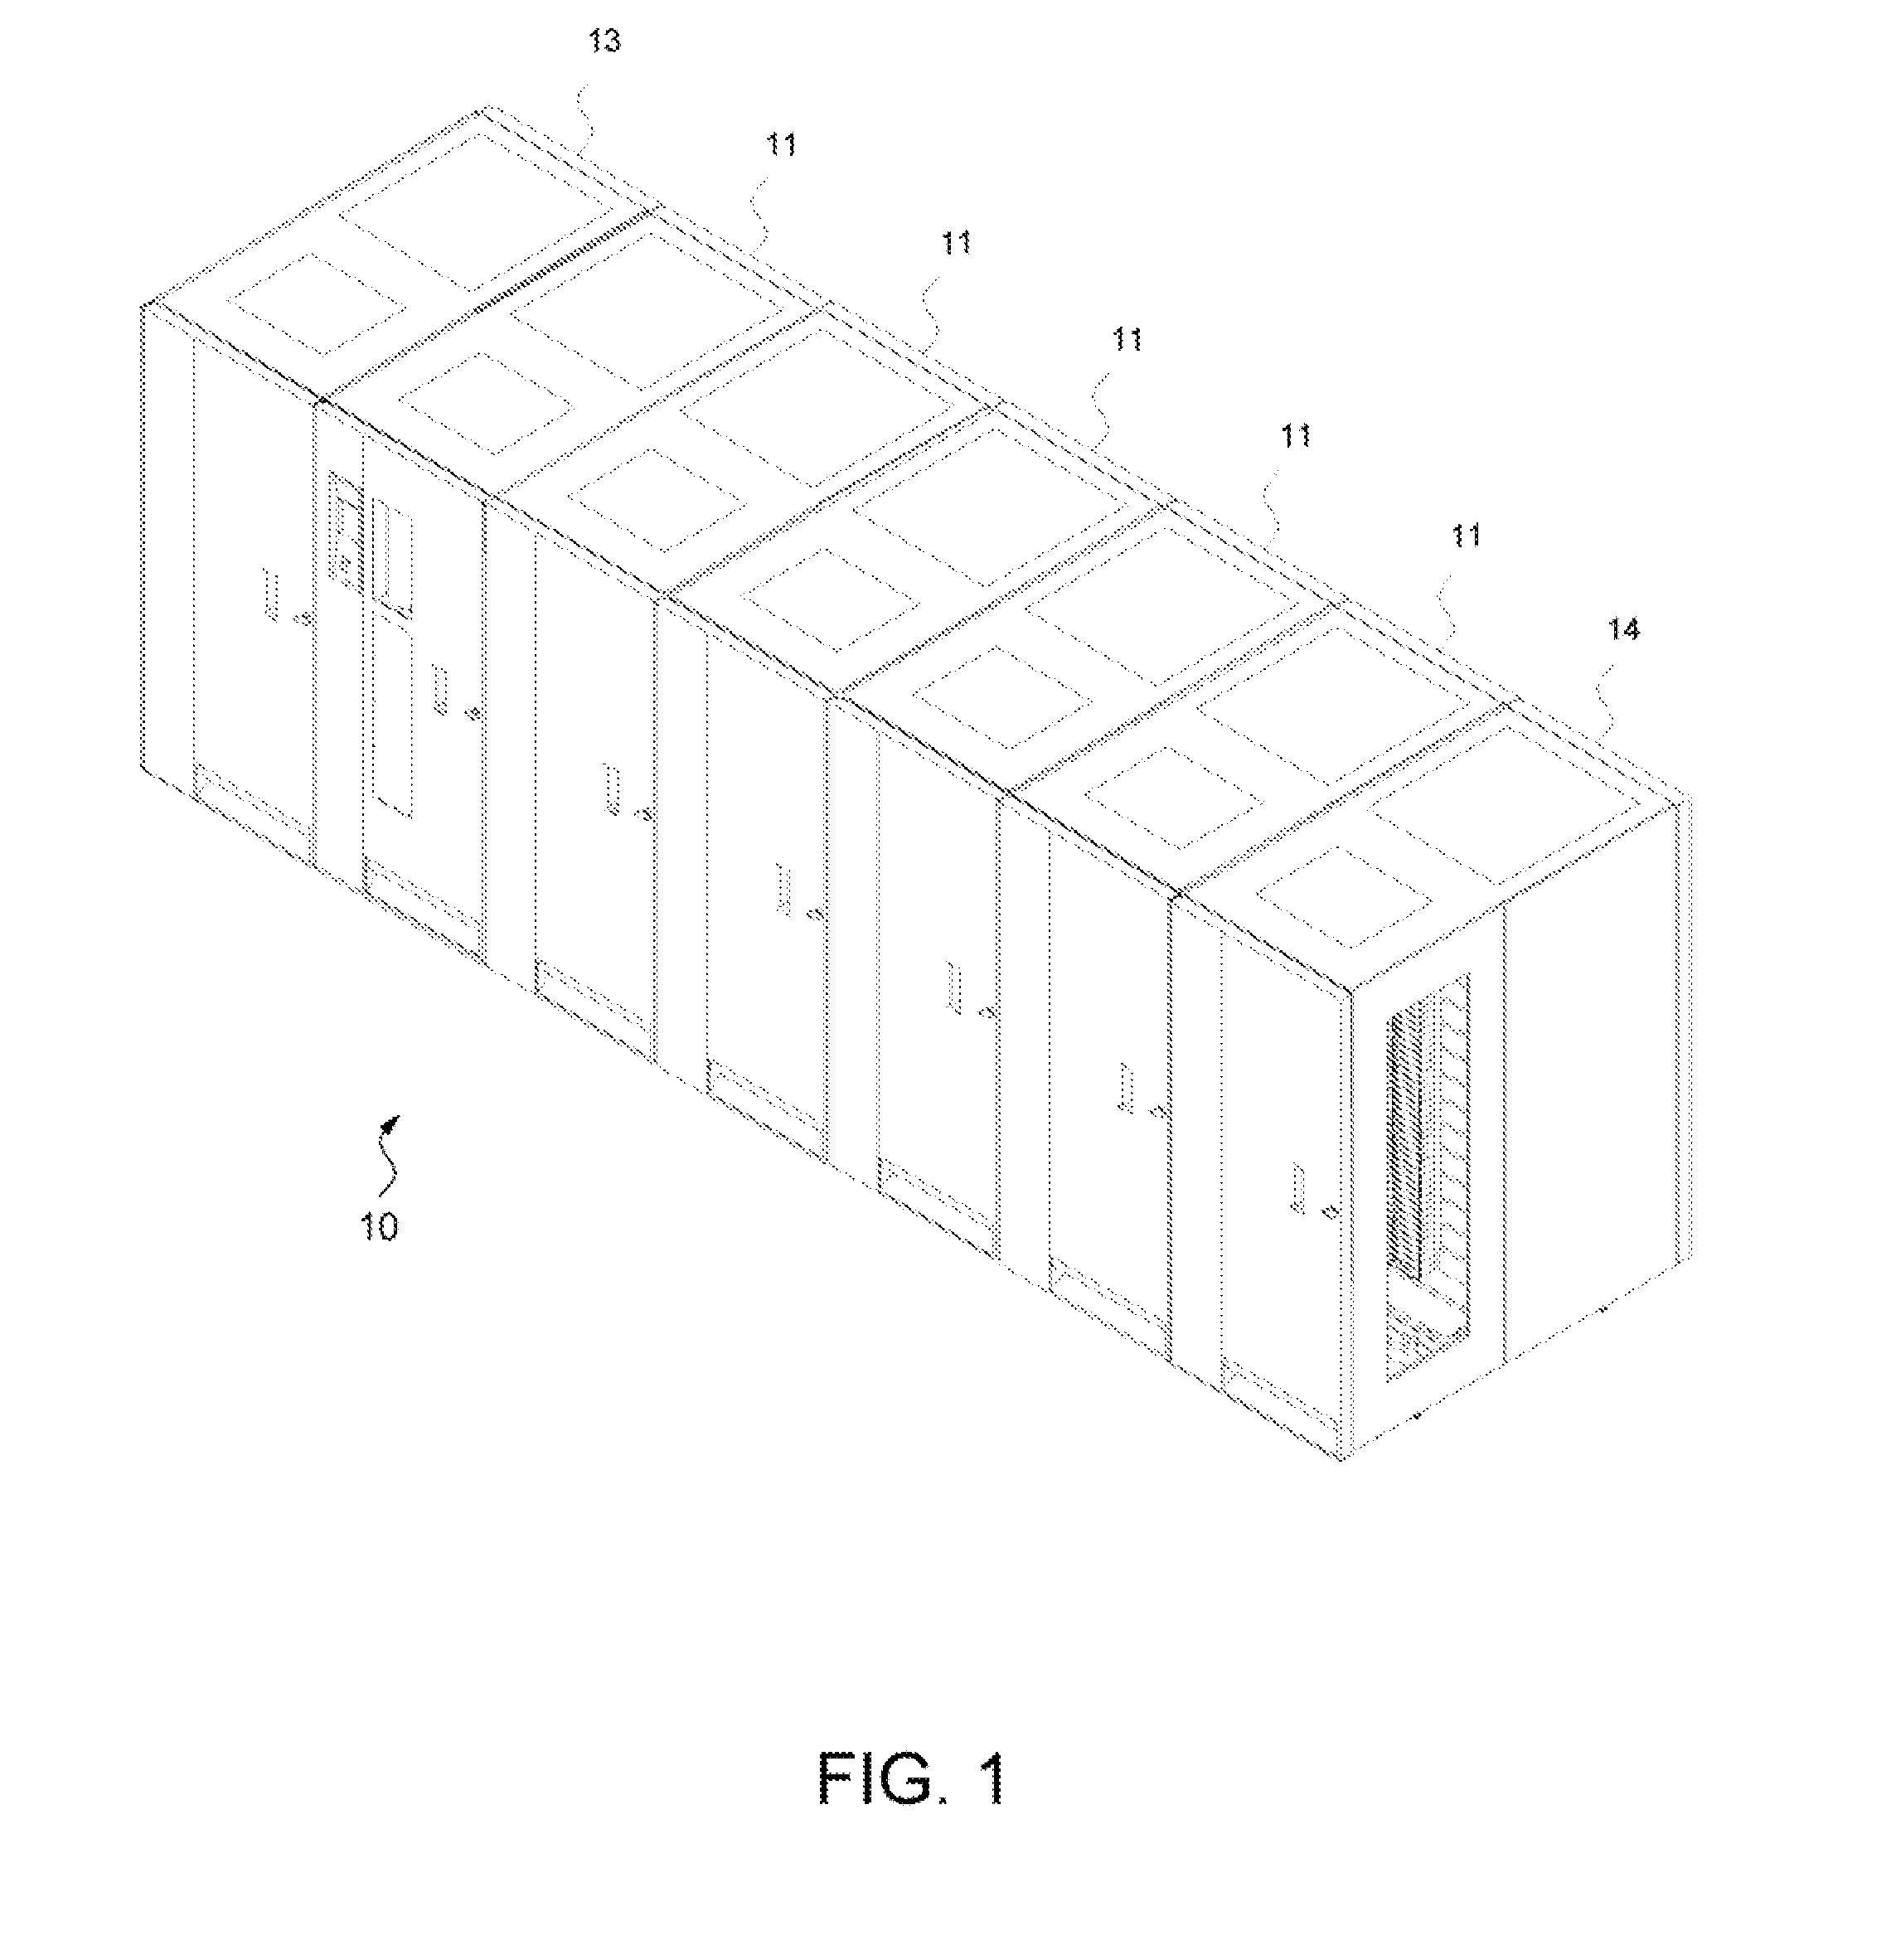 Selective encryption of data stored on removable media in an automated data storage library